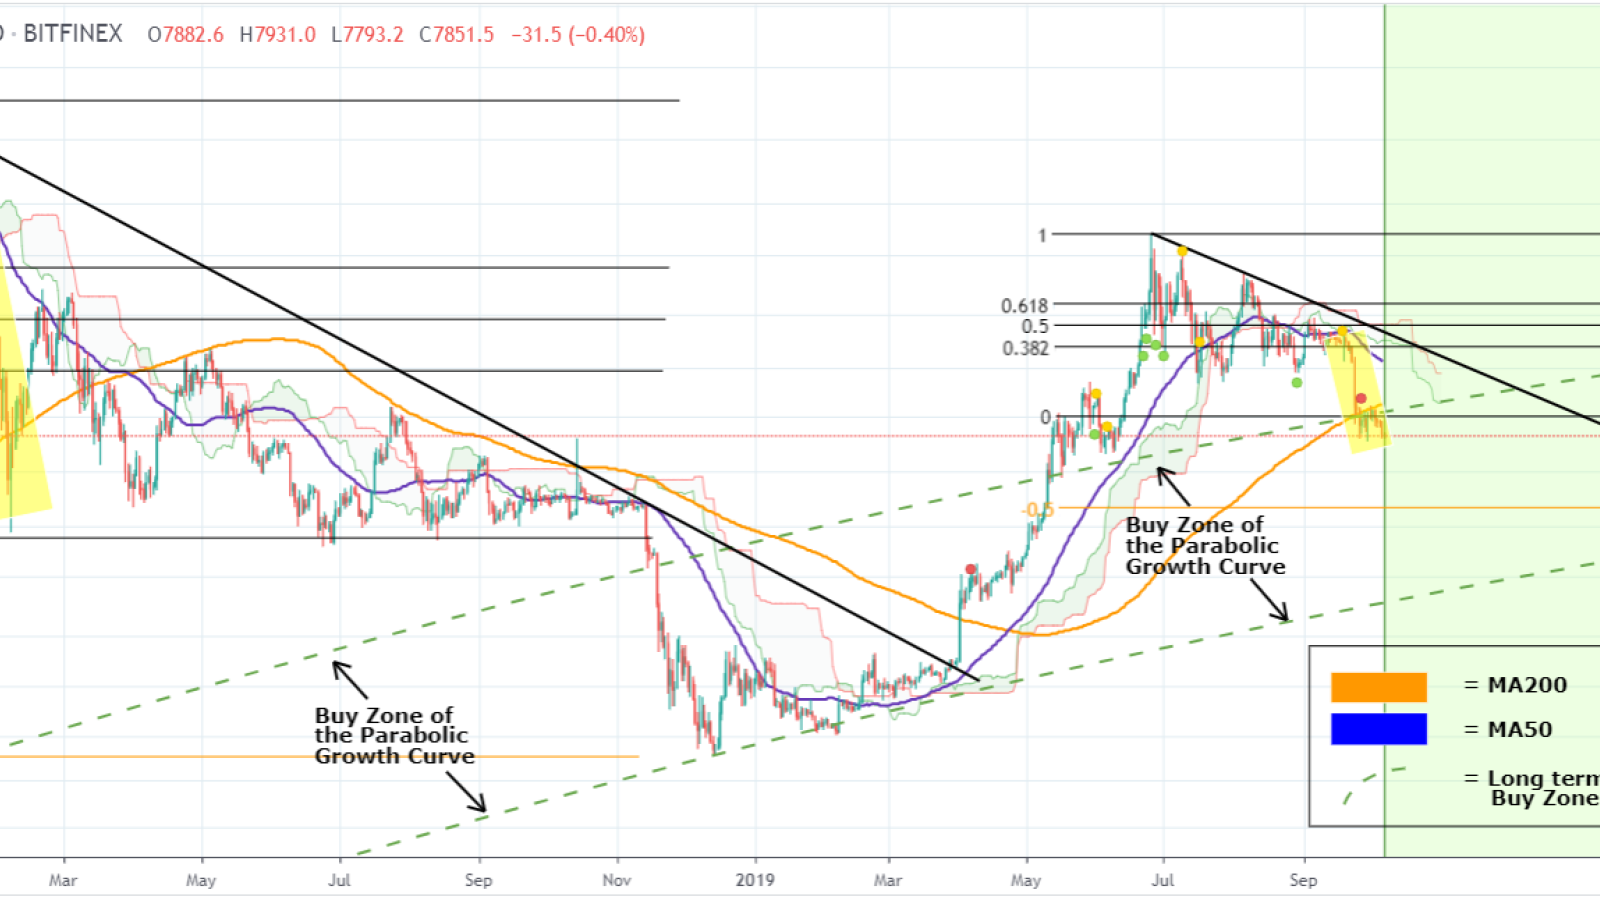 Bitcoin is entering the buy zone